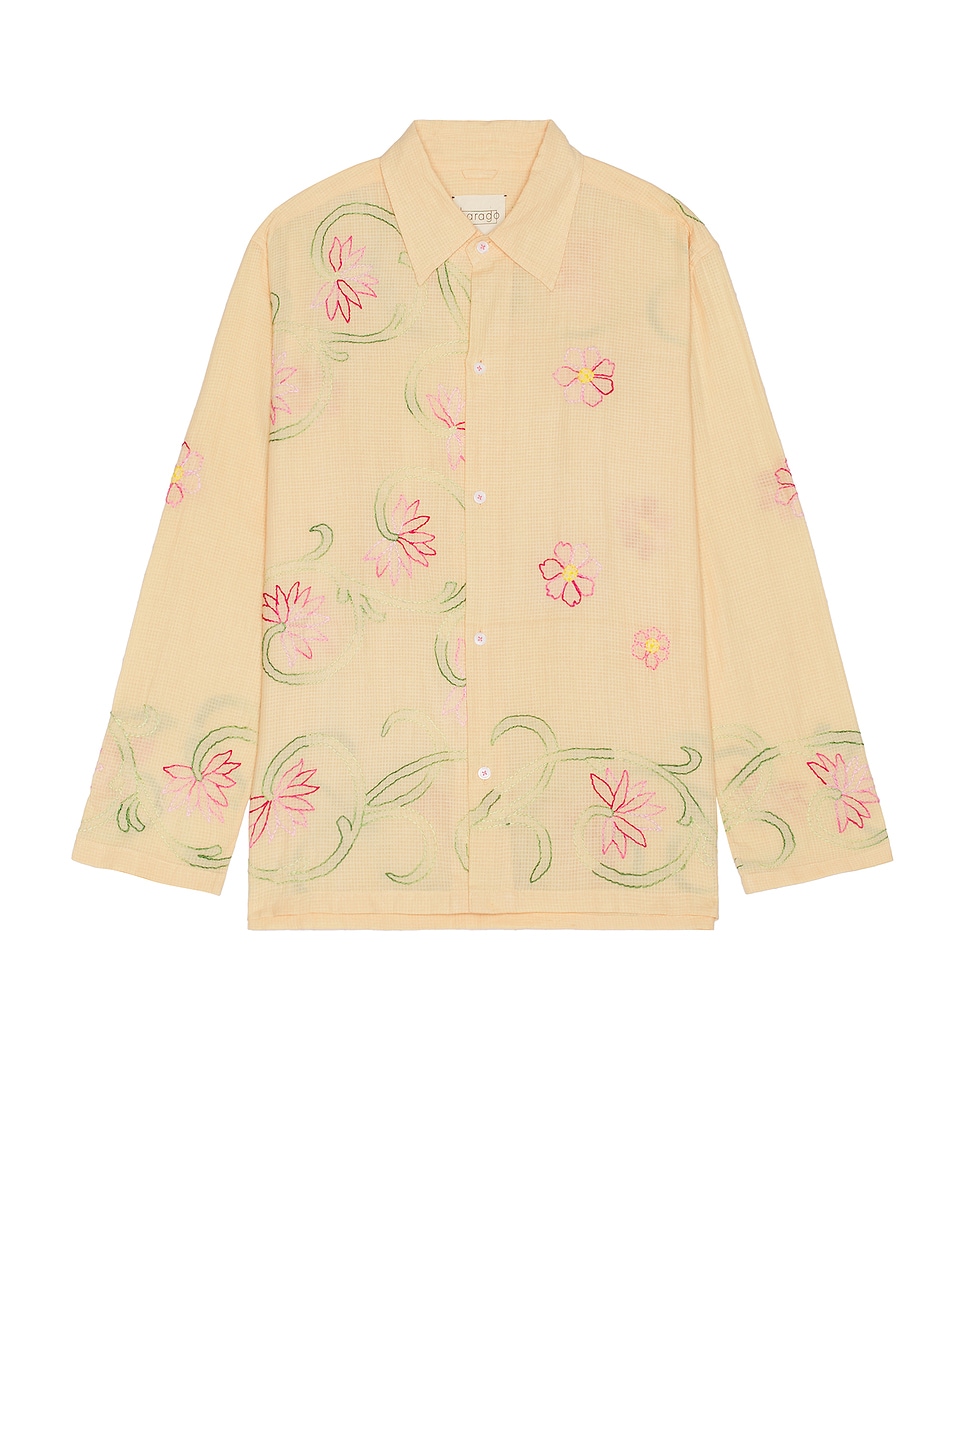 Floral Embroidered Shirt in Yellow